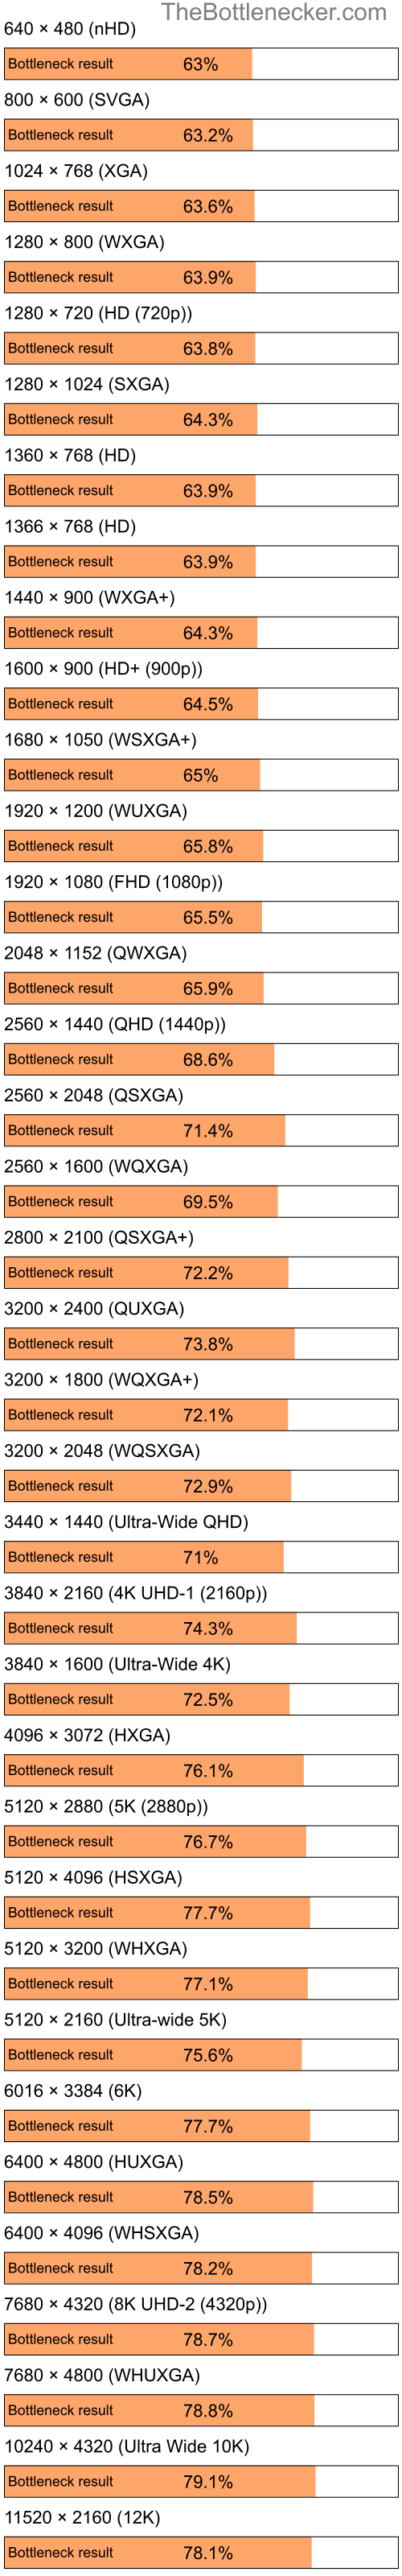 Bottleneck results by resolution for Intel Atom Z520 and AMD Mobility Radeon HD 2400 XT in7 Days to Die